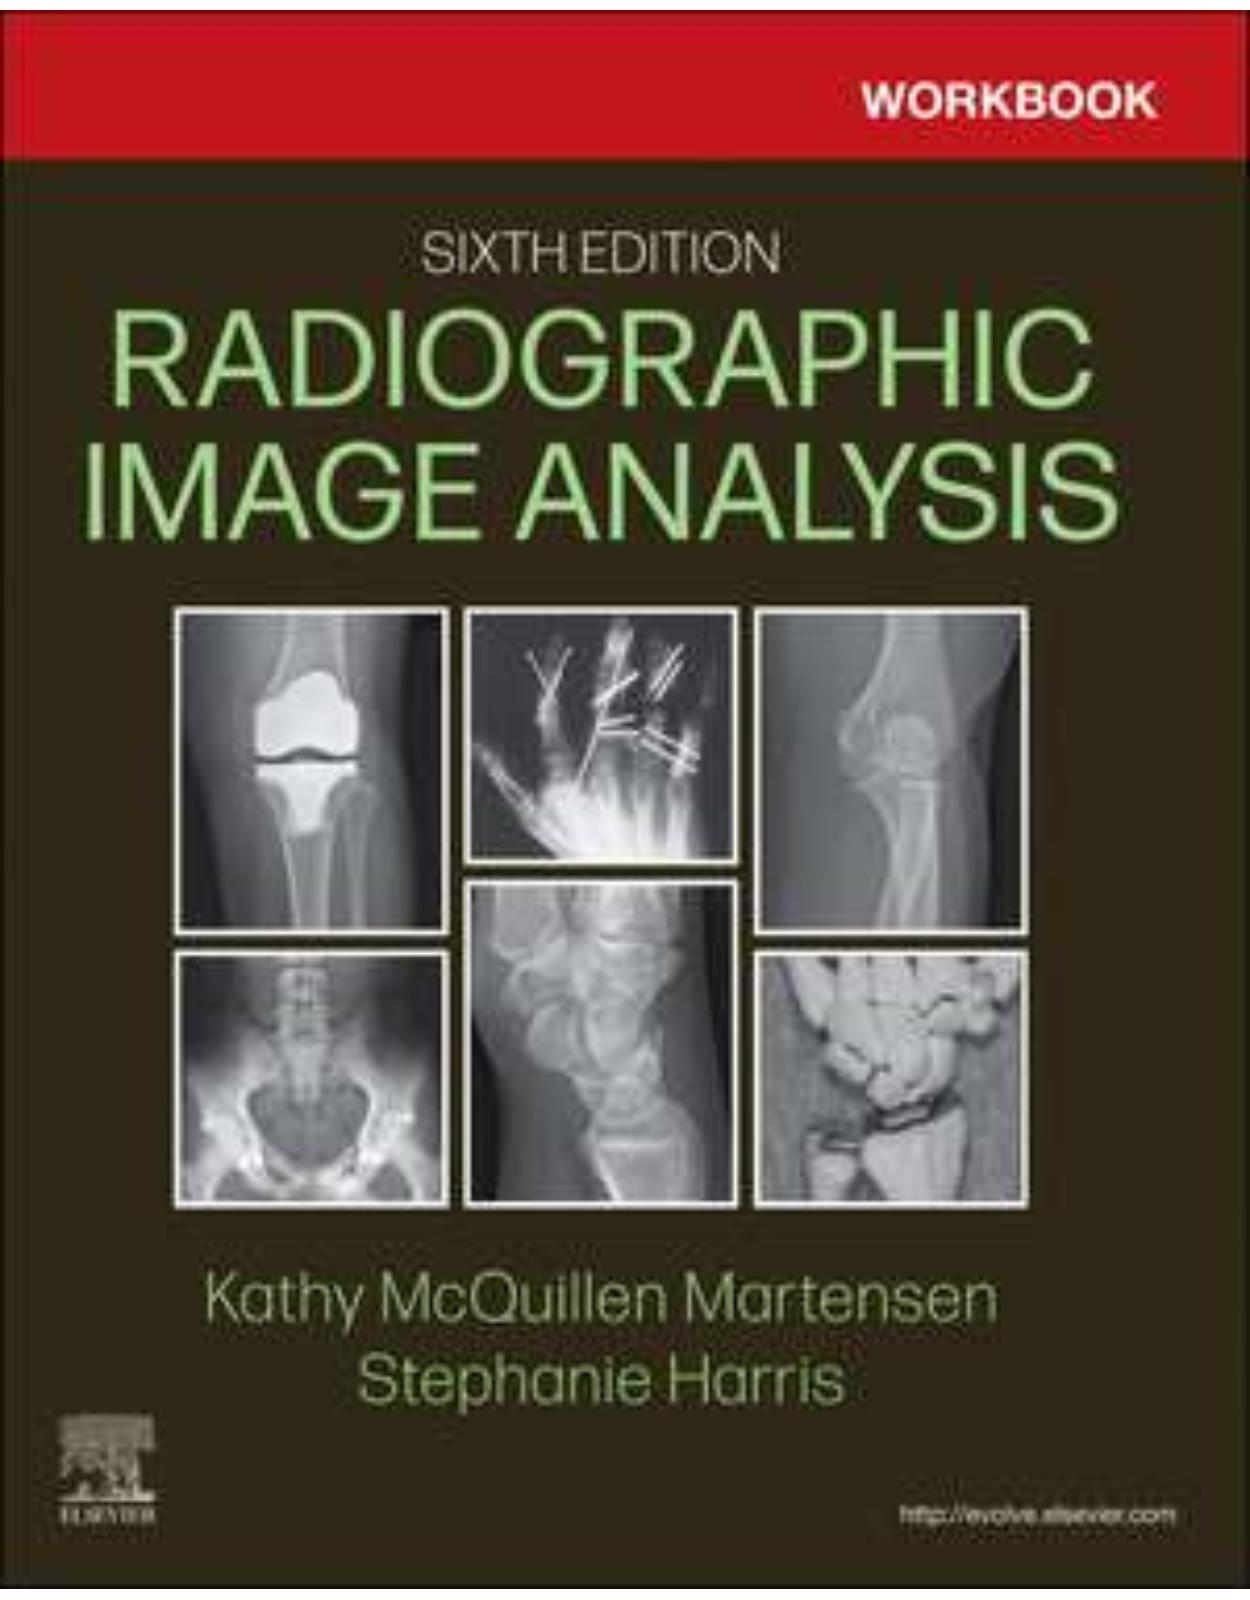 Workbook for Radiographic Image Analysis, 6th Edition